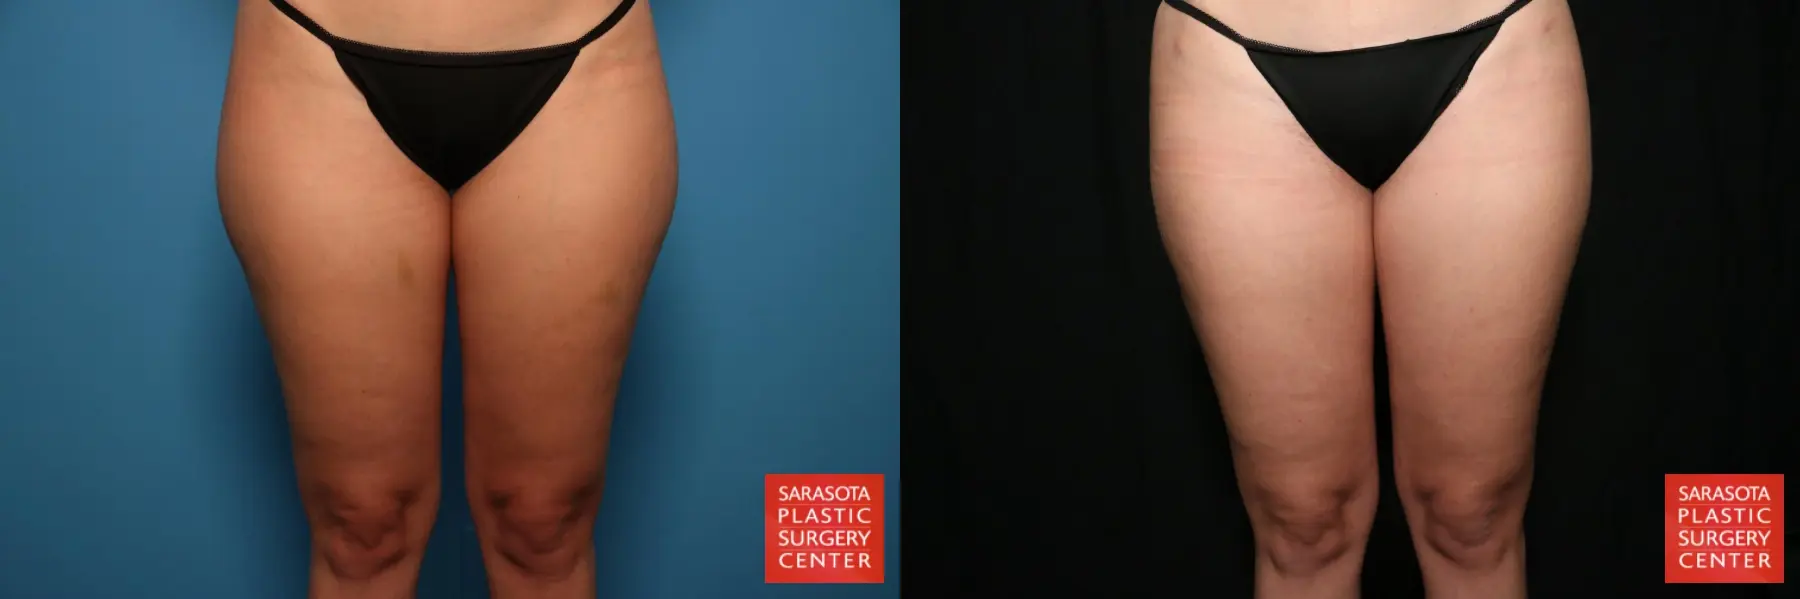 Liposuction: Patient 1 - Before and After 1